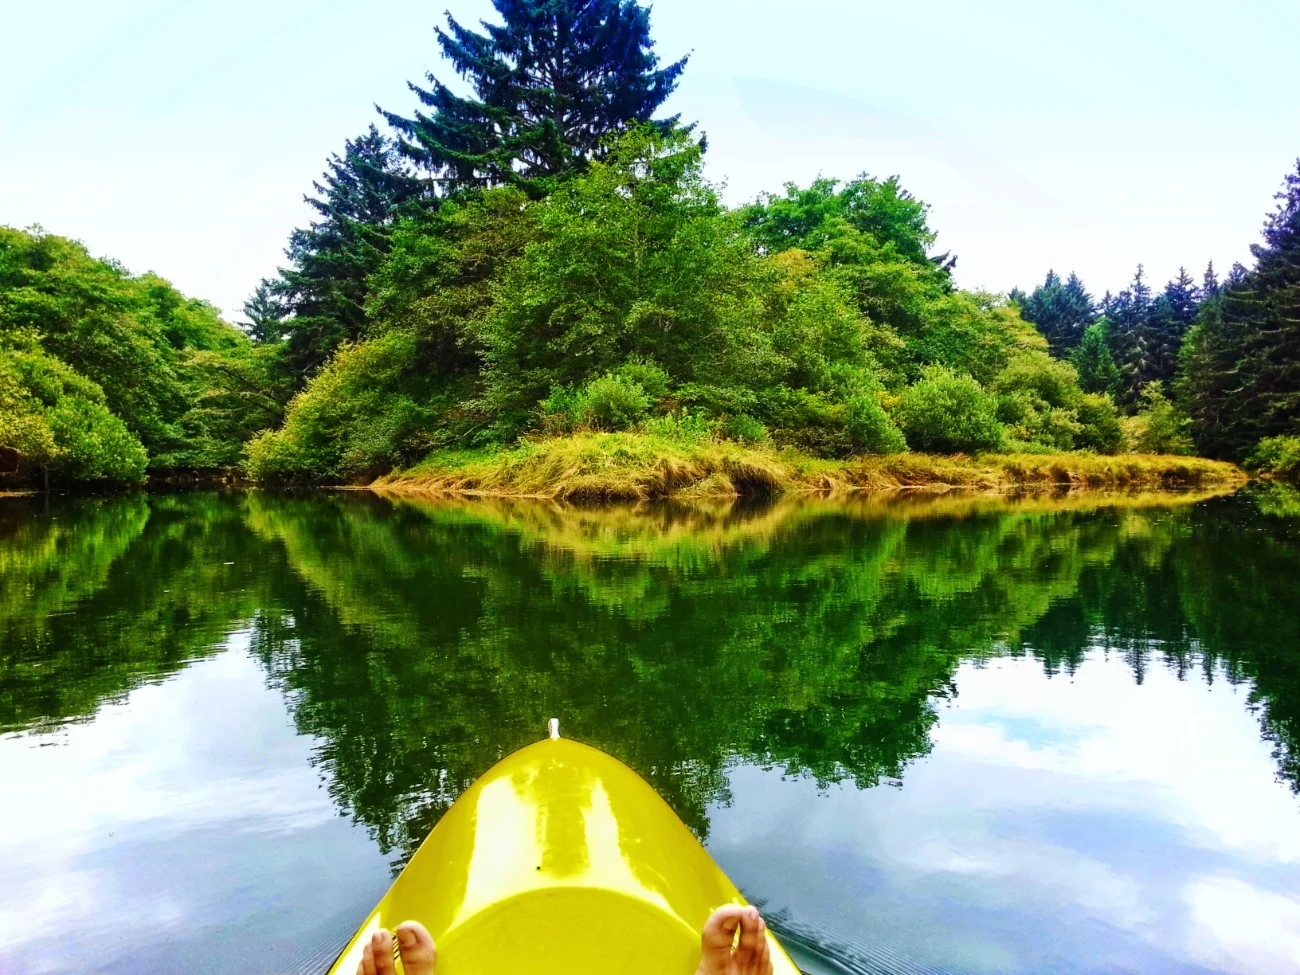 Reflections while Kayaking on Quilute River La Push Olympic Peninsula 2